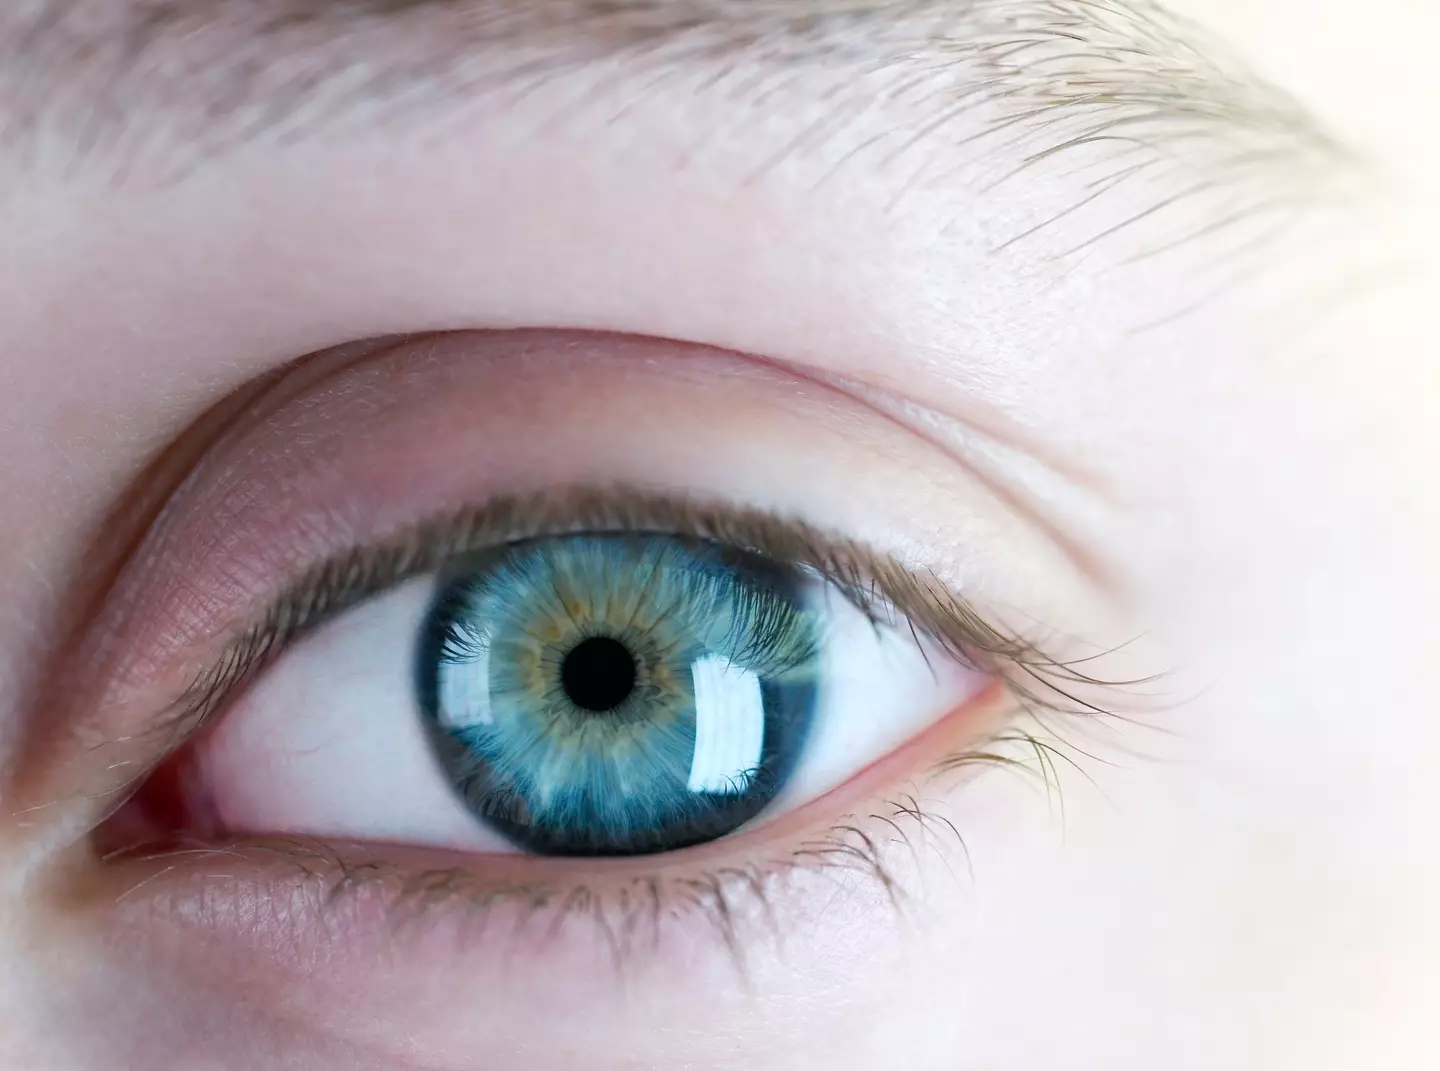 It could actually be something to do with your eye health.